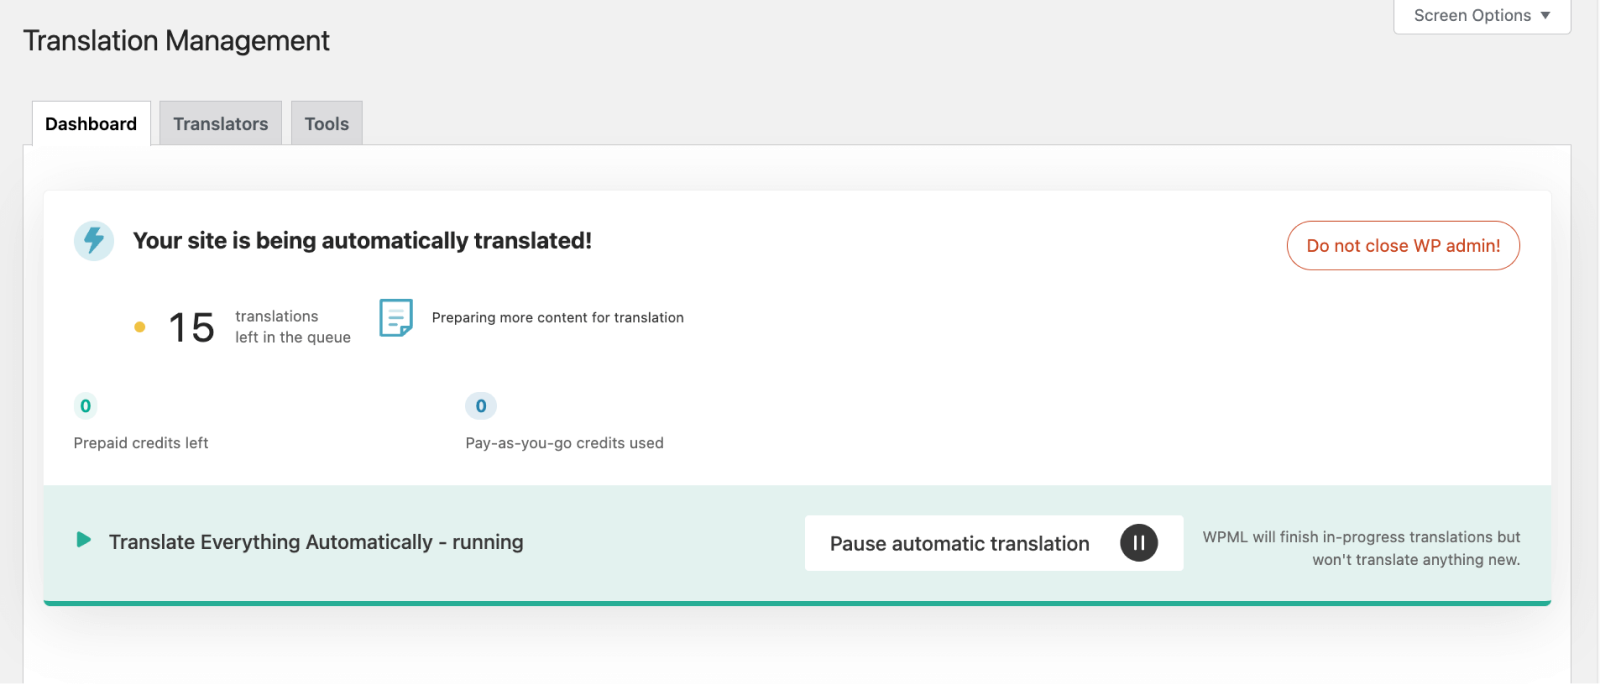 Monitoring the status of automatic translations in WPML, showing the number of translations left in the queue.